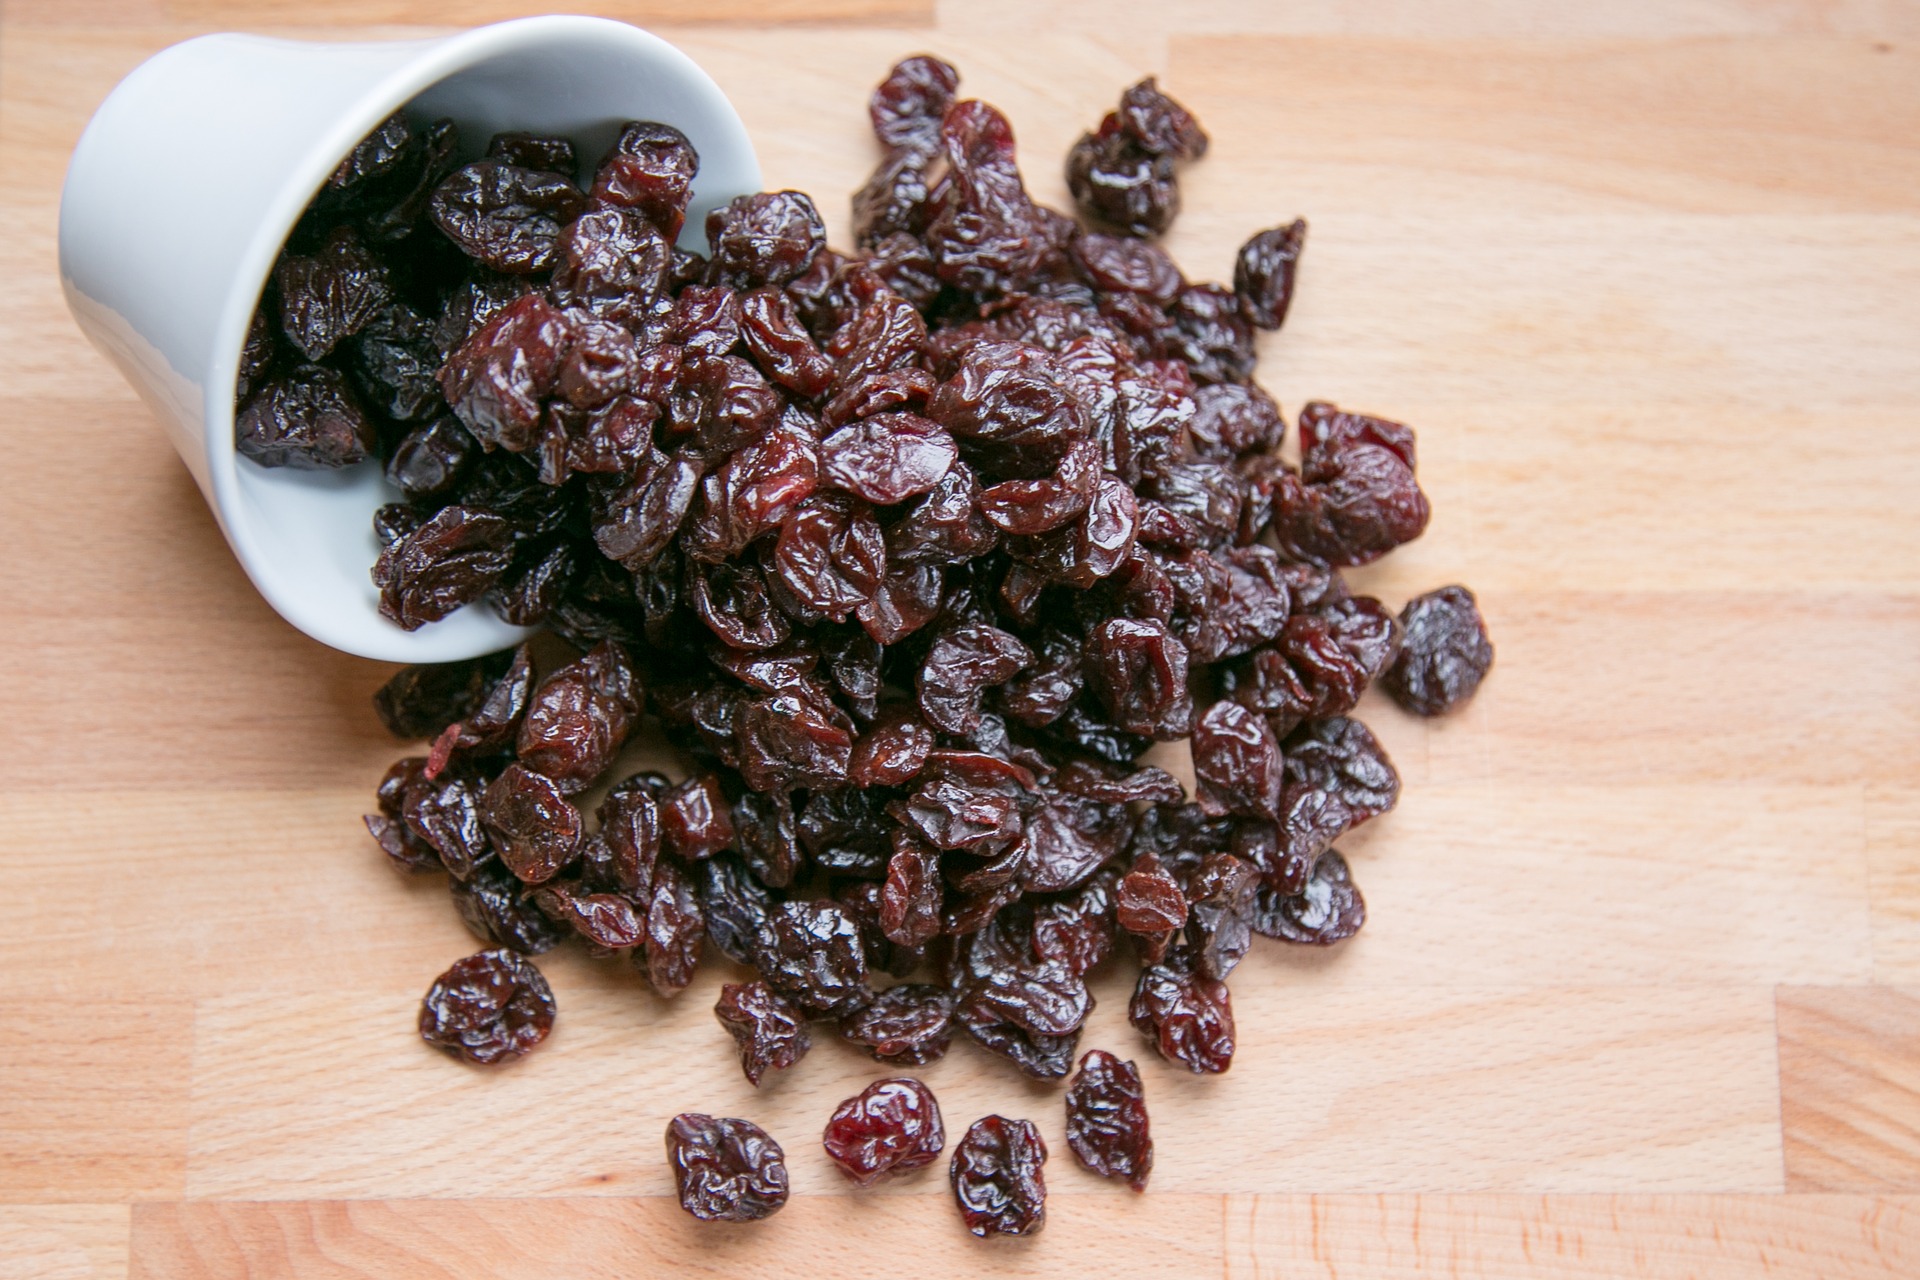 Dried cherries scatter across a cutting board